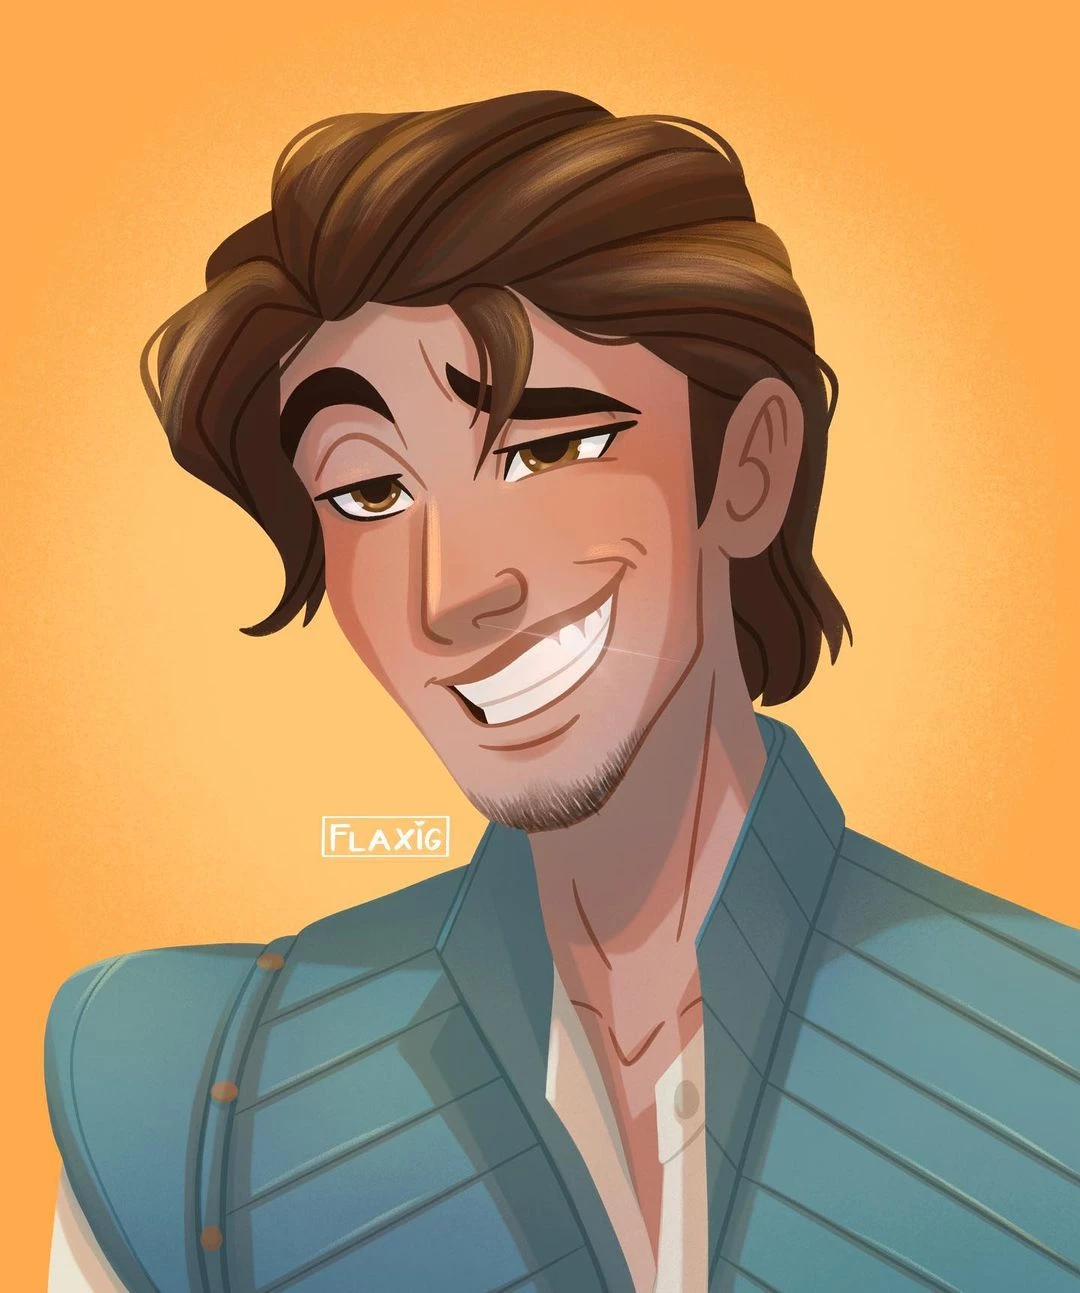 Flynn Rider’s Shiny Grin In The Wanted Poster (Tangled)